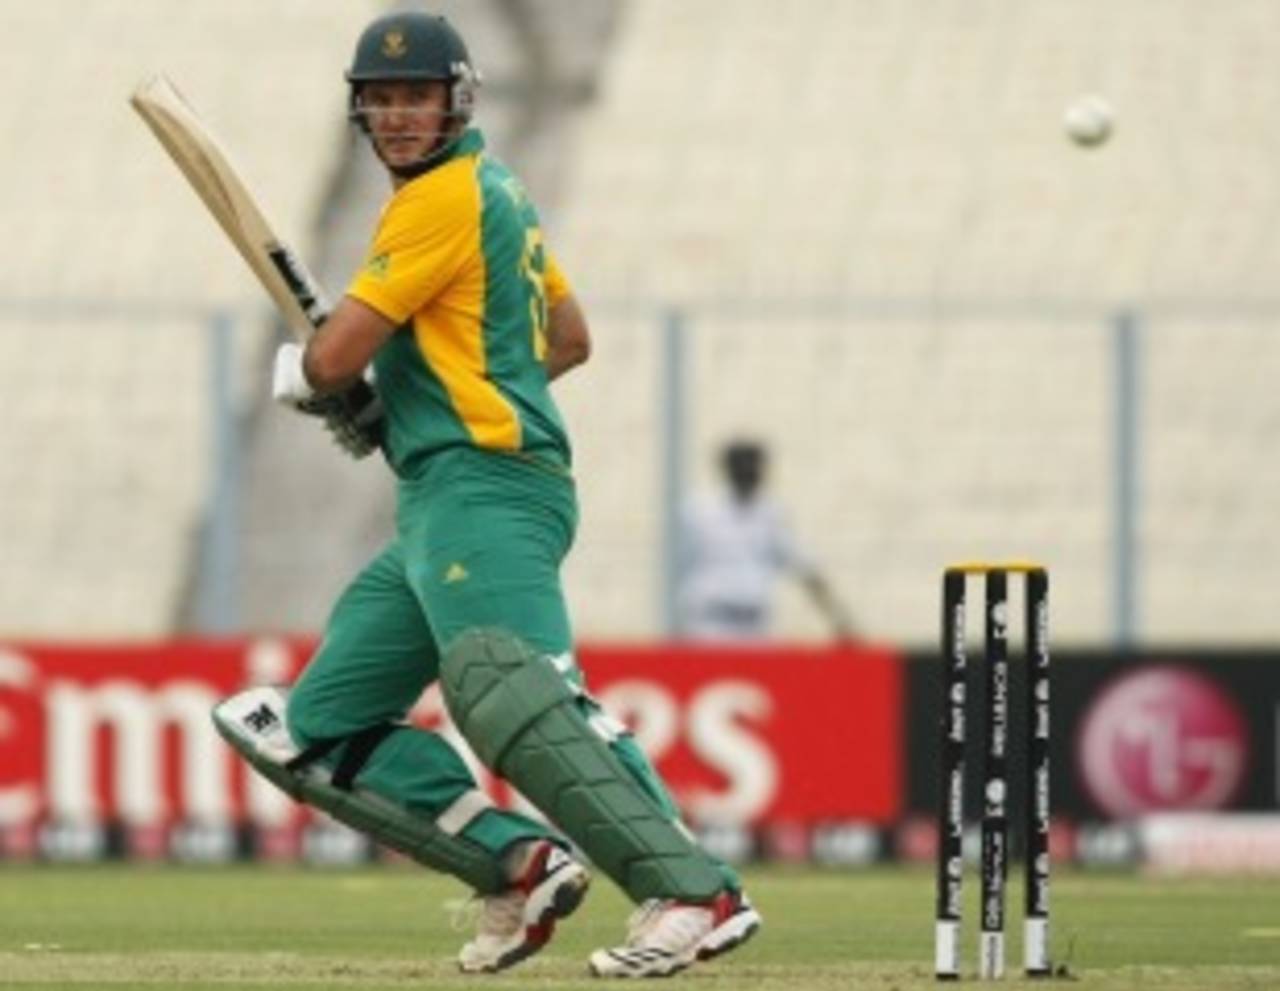 Graeme Smith plays the ball behind point, Ireland v South Africa, Group B, World Cup, Kolkata, March 15, 2011